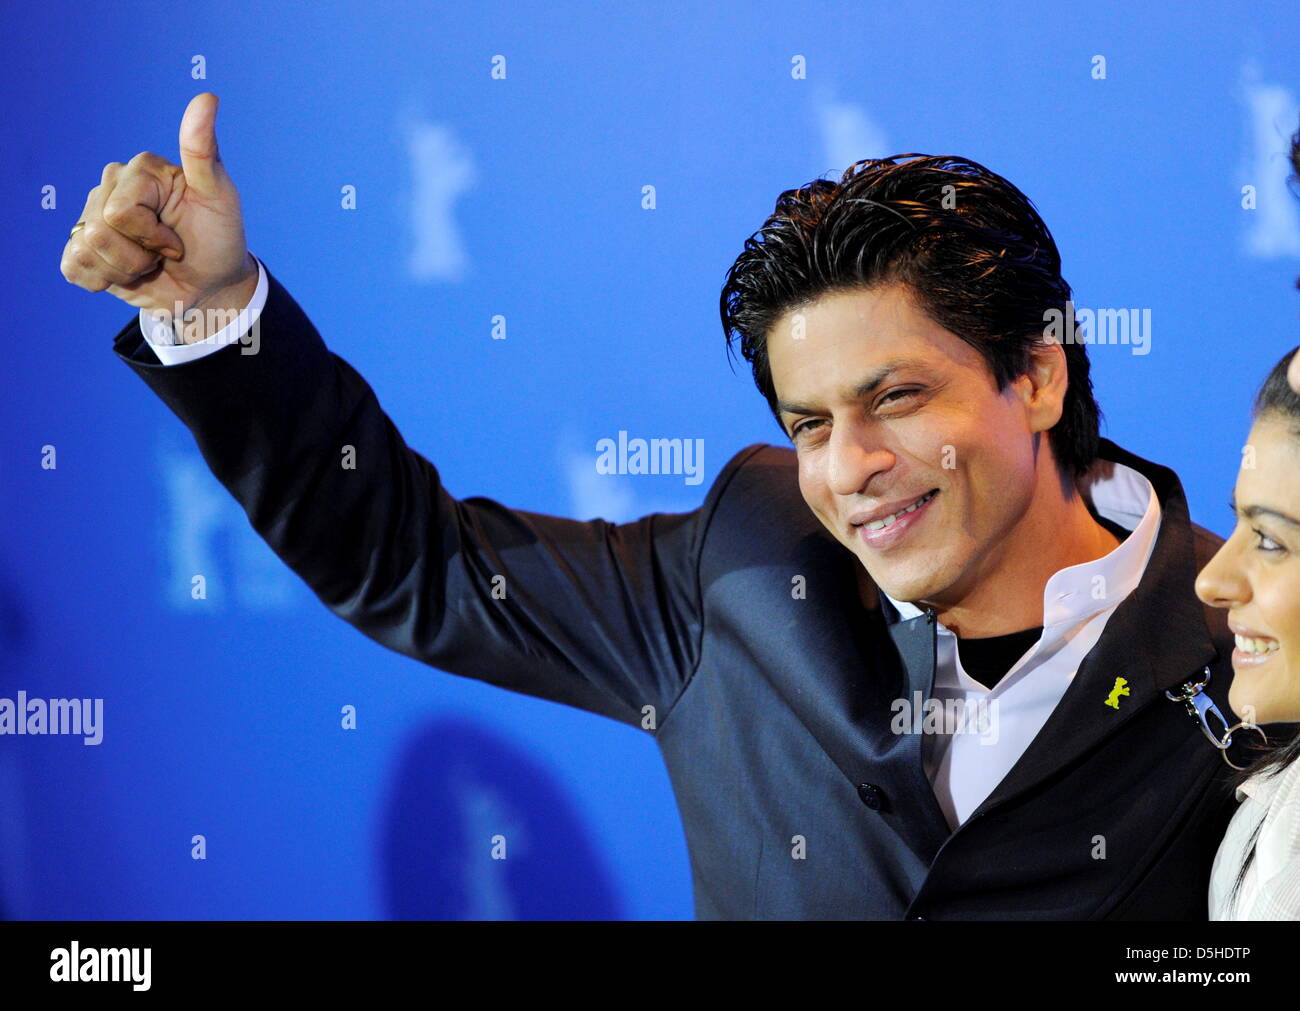 Indian actor Shah Rukh Khan and Indian actress Kajol Devgan attend the photocall for the film 'My name is Khan' running in competition during the 60th Berlinale International Film Festival in Berlin, Germany, Friday, 12 February 2010. Photo: Soeren Stache dpa/lbn Stock Photo